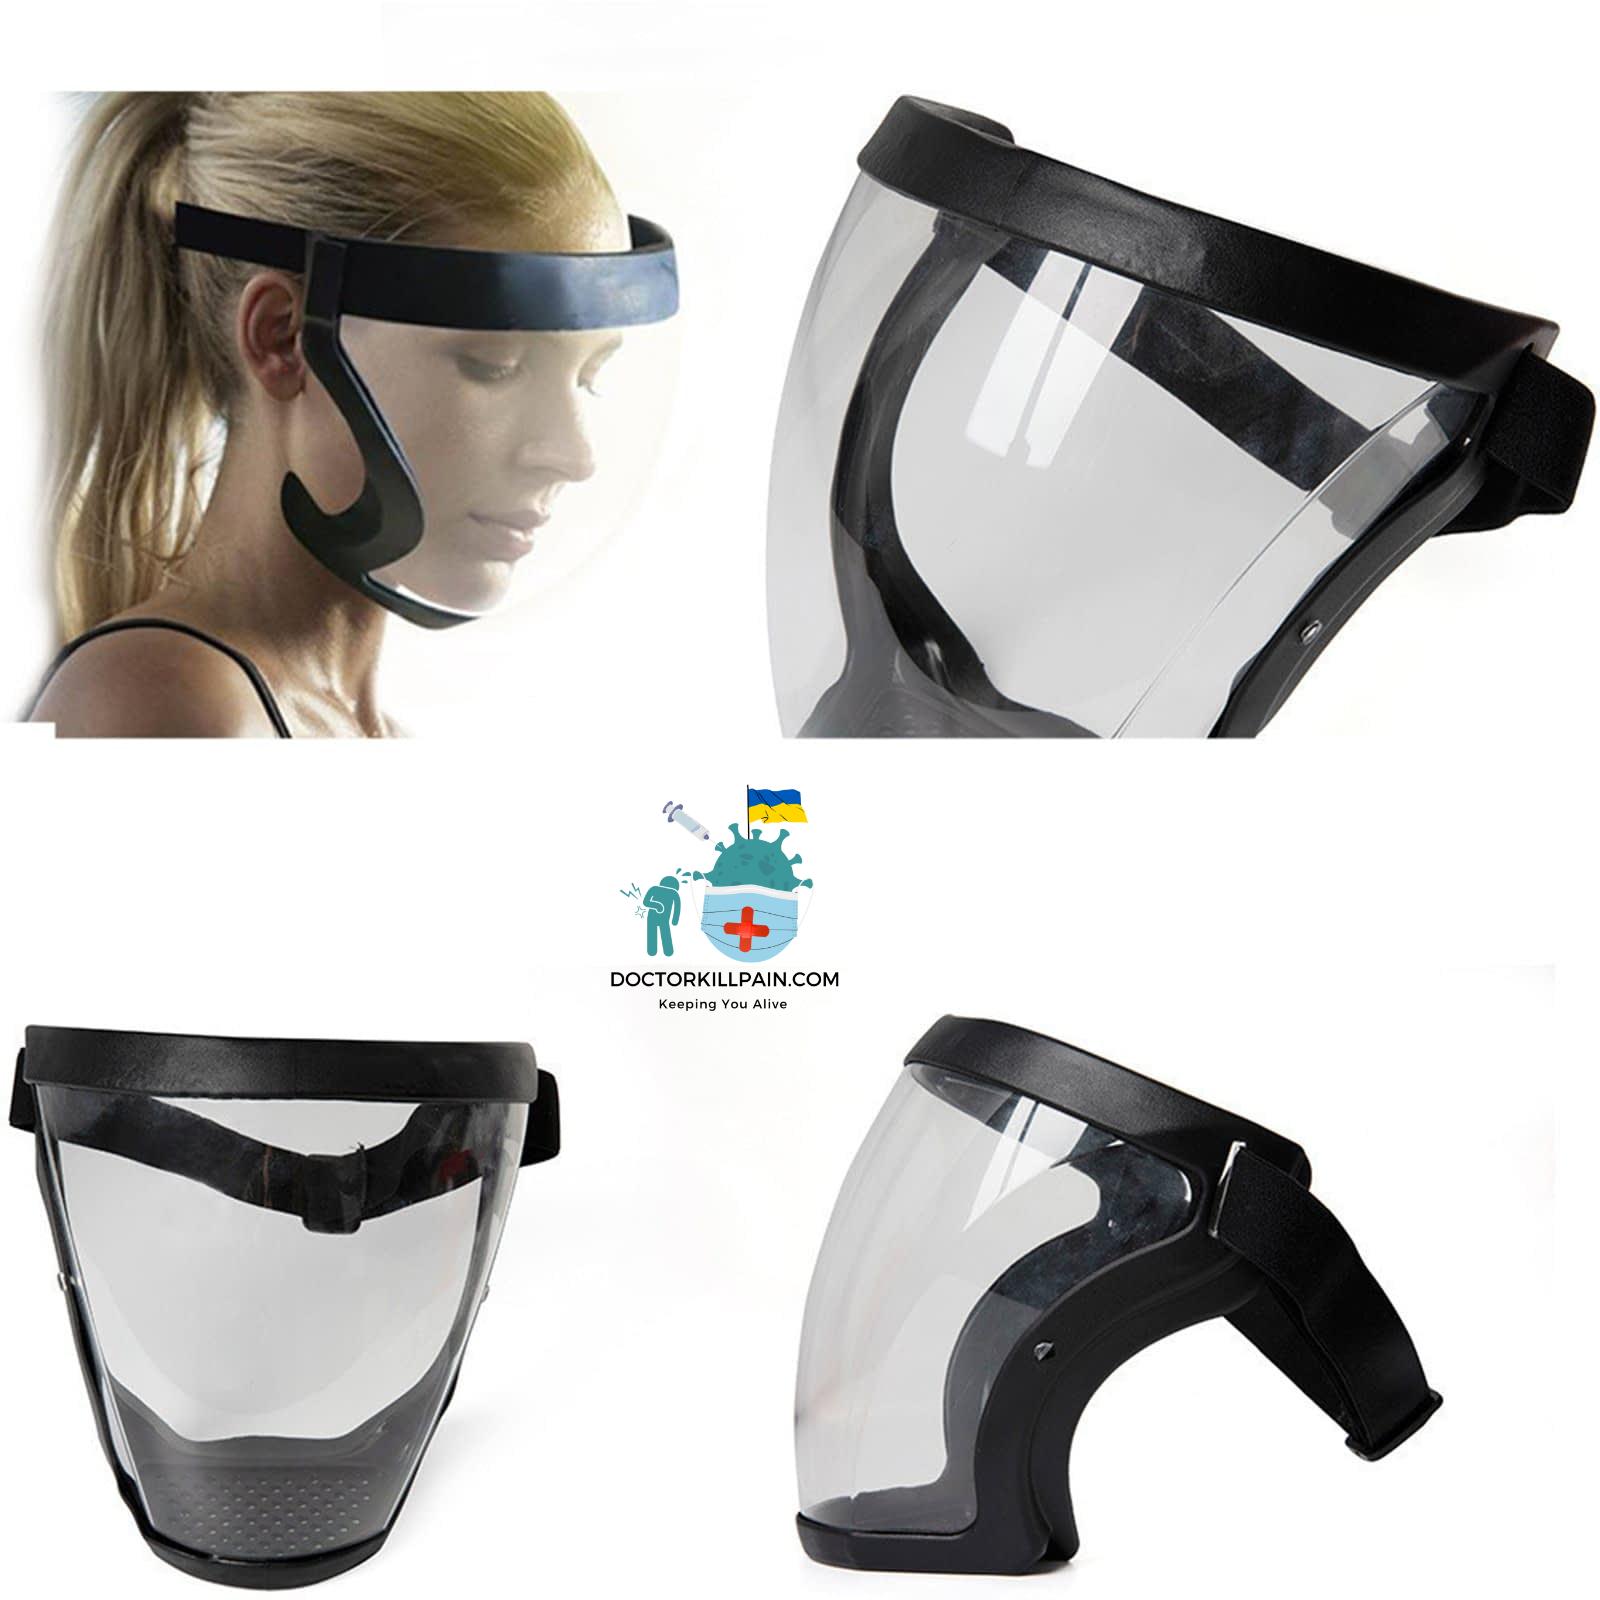 Must Companies sale this mask for .99, is way price is going to be .99 Protective Mask Splash-proof Protect Eye Full Face Cover Transparent Goggles Anti-spray Kitchen Face Shield Protective Visor